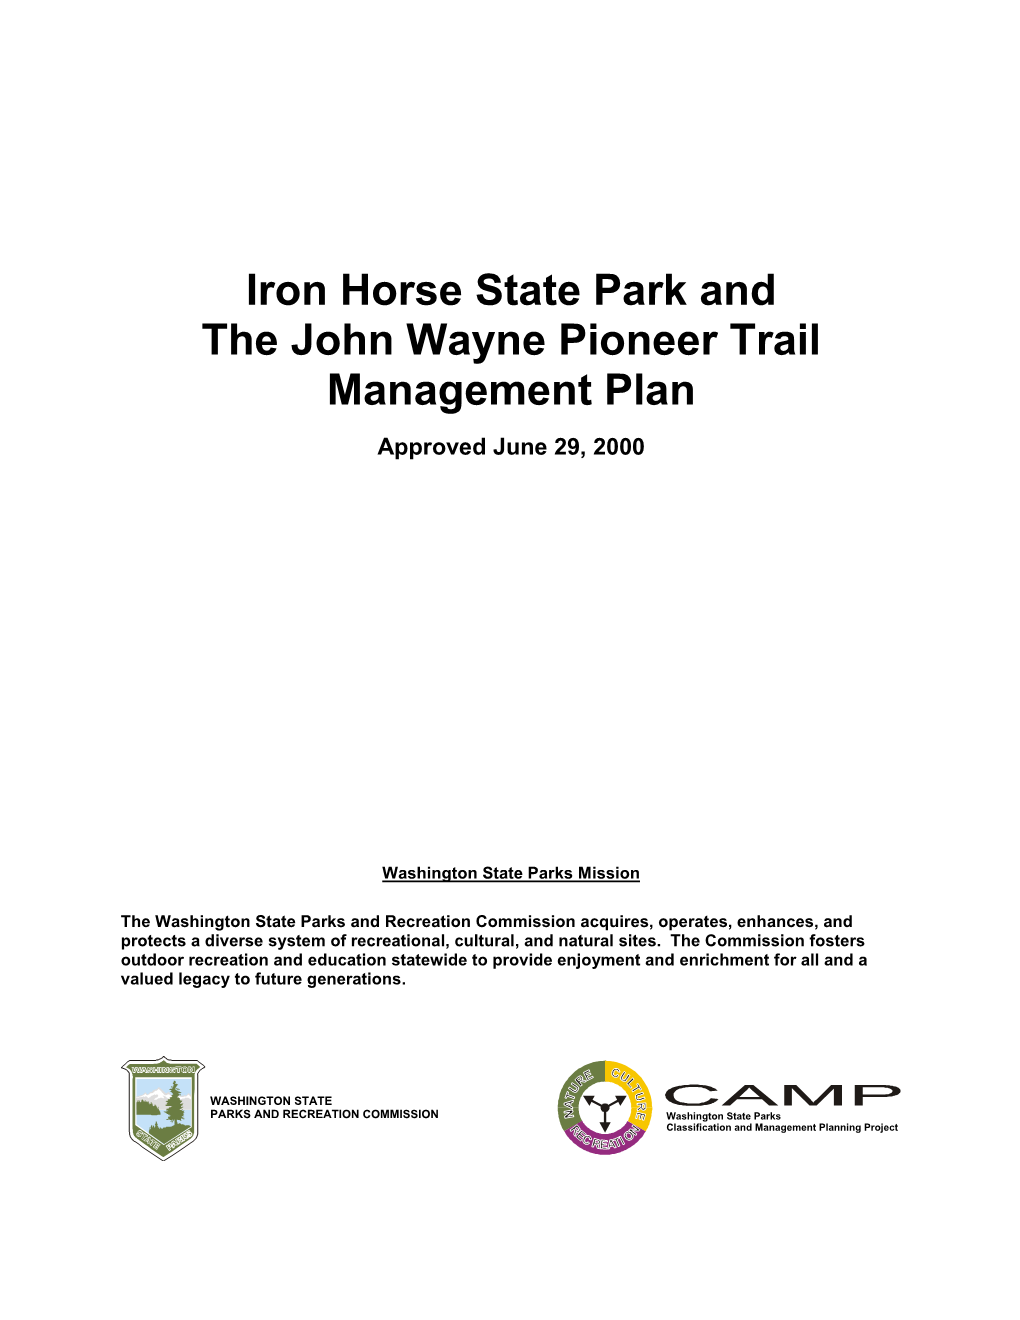 Iron Horse State Park and John Wayne Pioneer Trail Management Plan April 2, 2000 Appendix C: Page 1